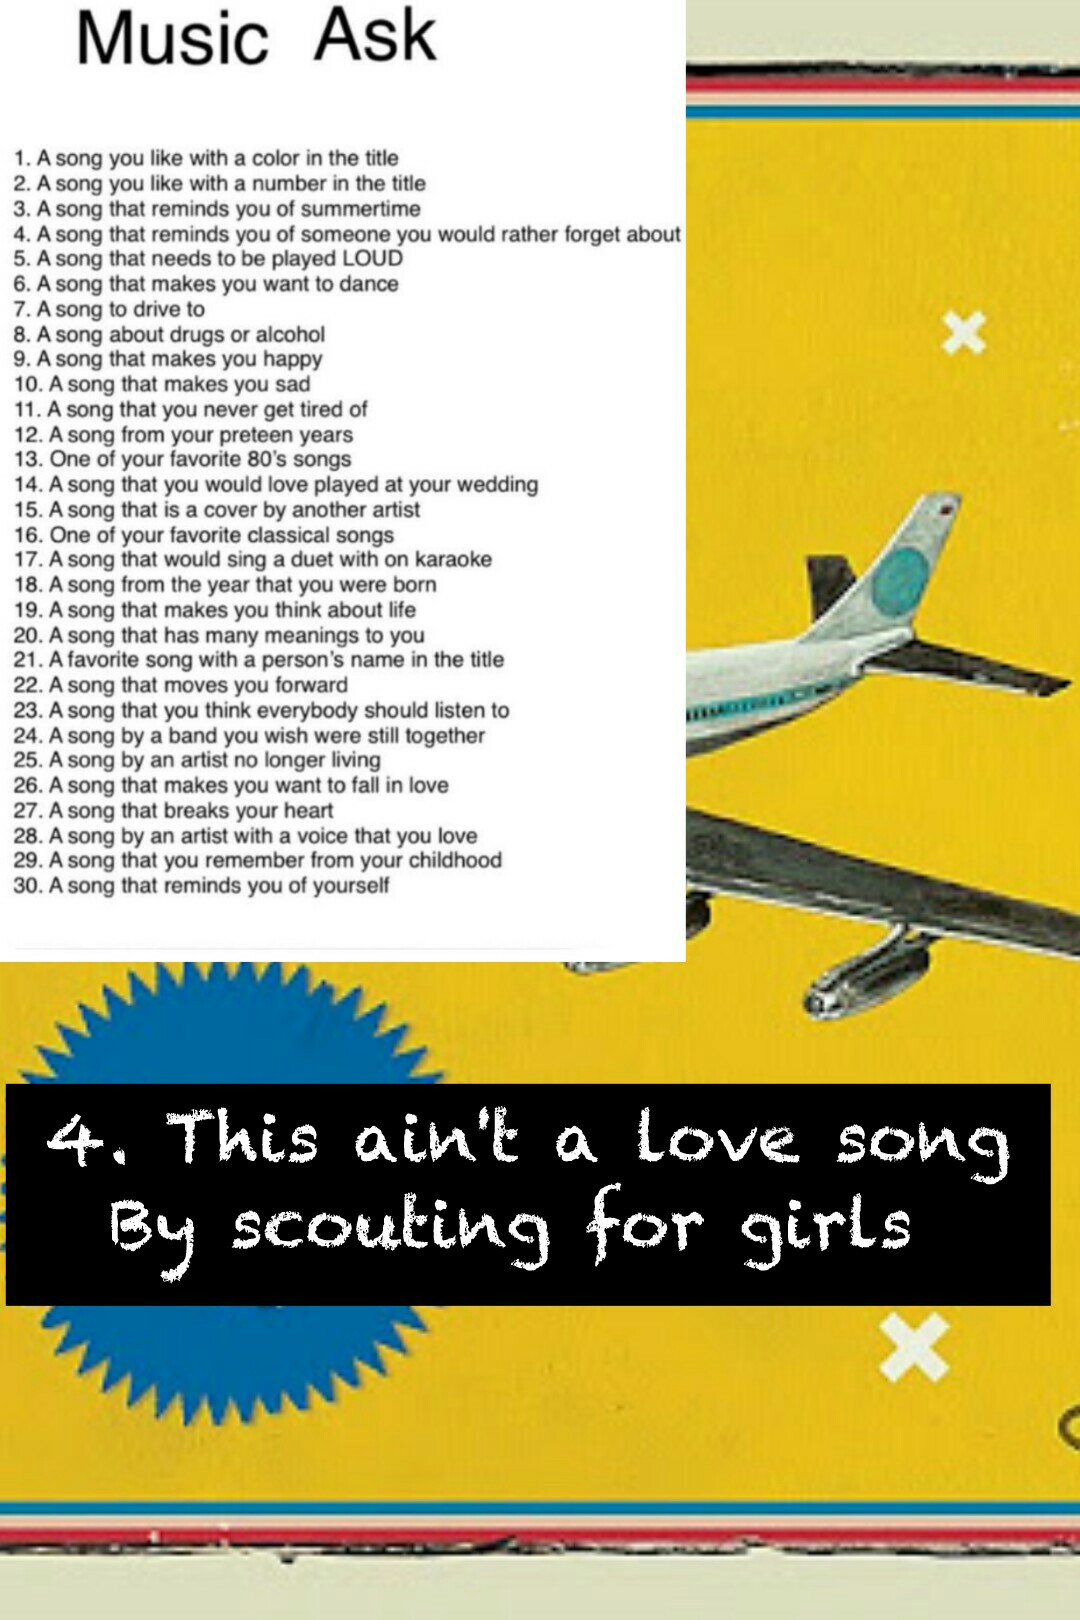 4. This ain't a love song
By scouting for girls 